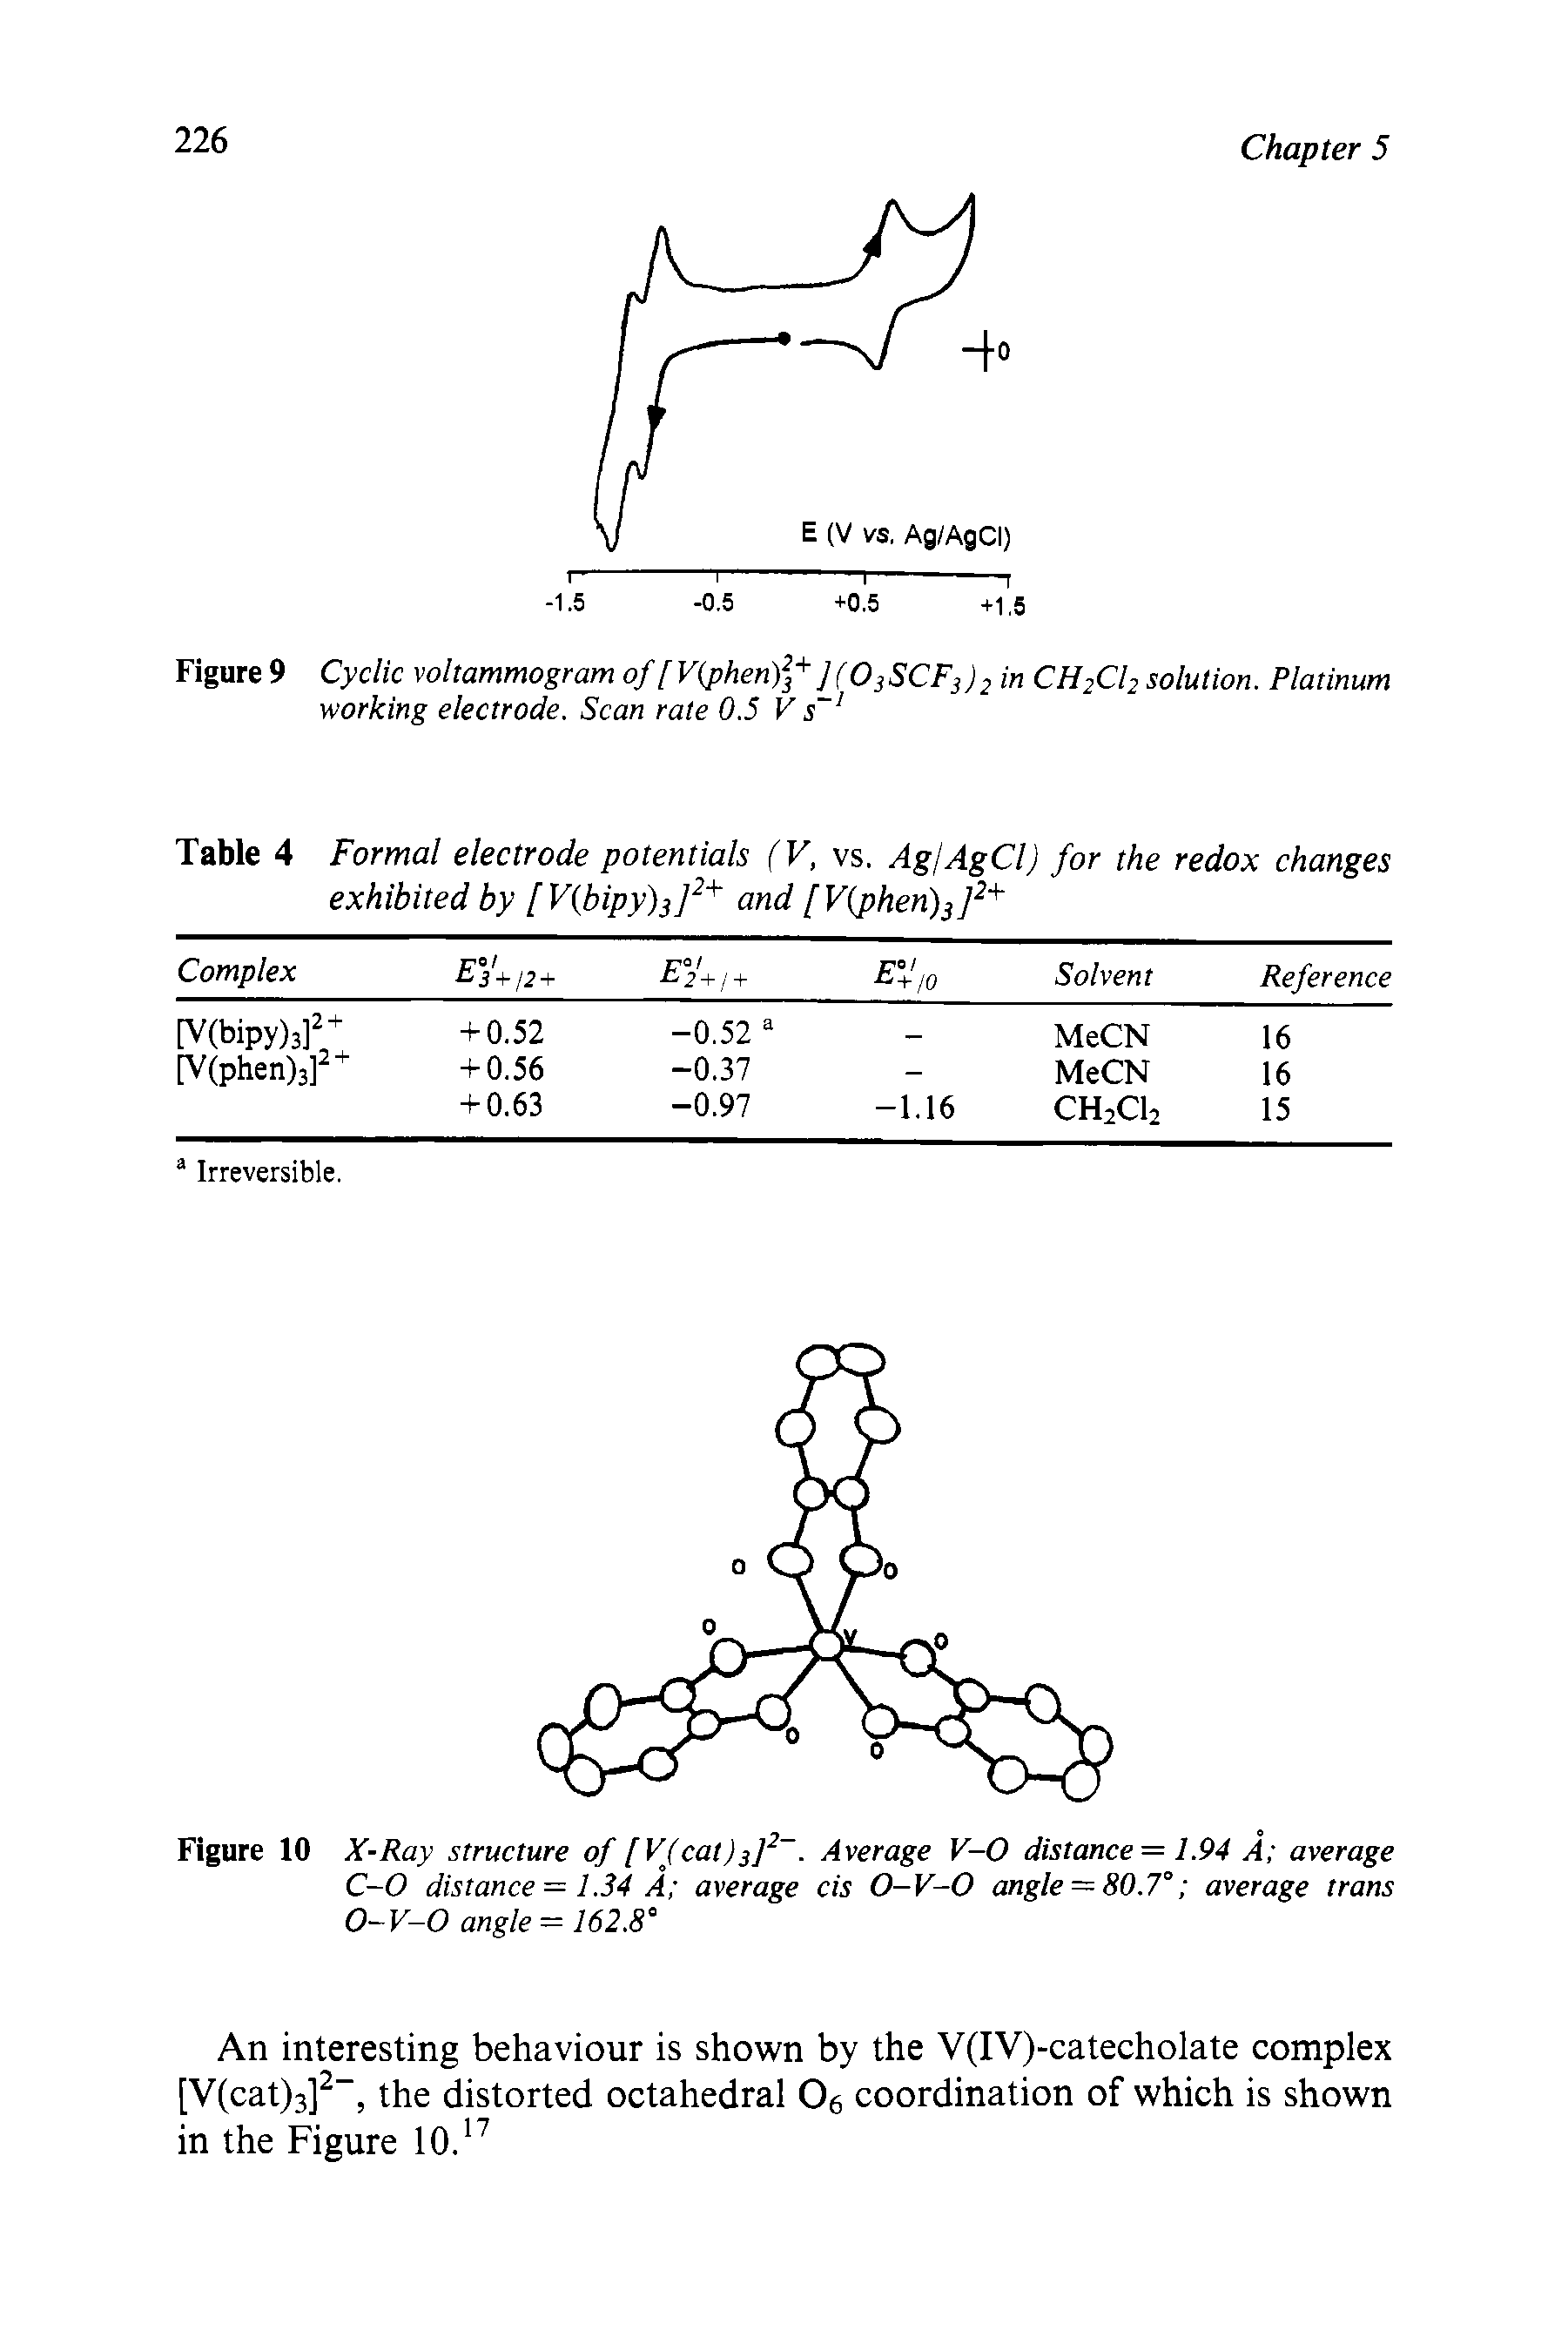 Table 4 Formal electrode potentials (V, vs. Ag/AgCl) for the redox changes exhibited by [V bipy)3J2+ and [V(pheri)3J2+...